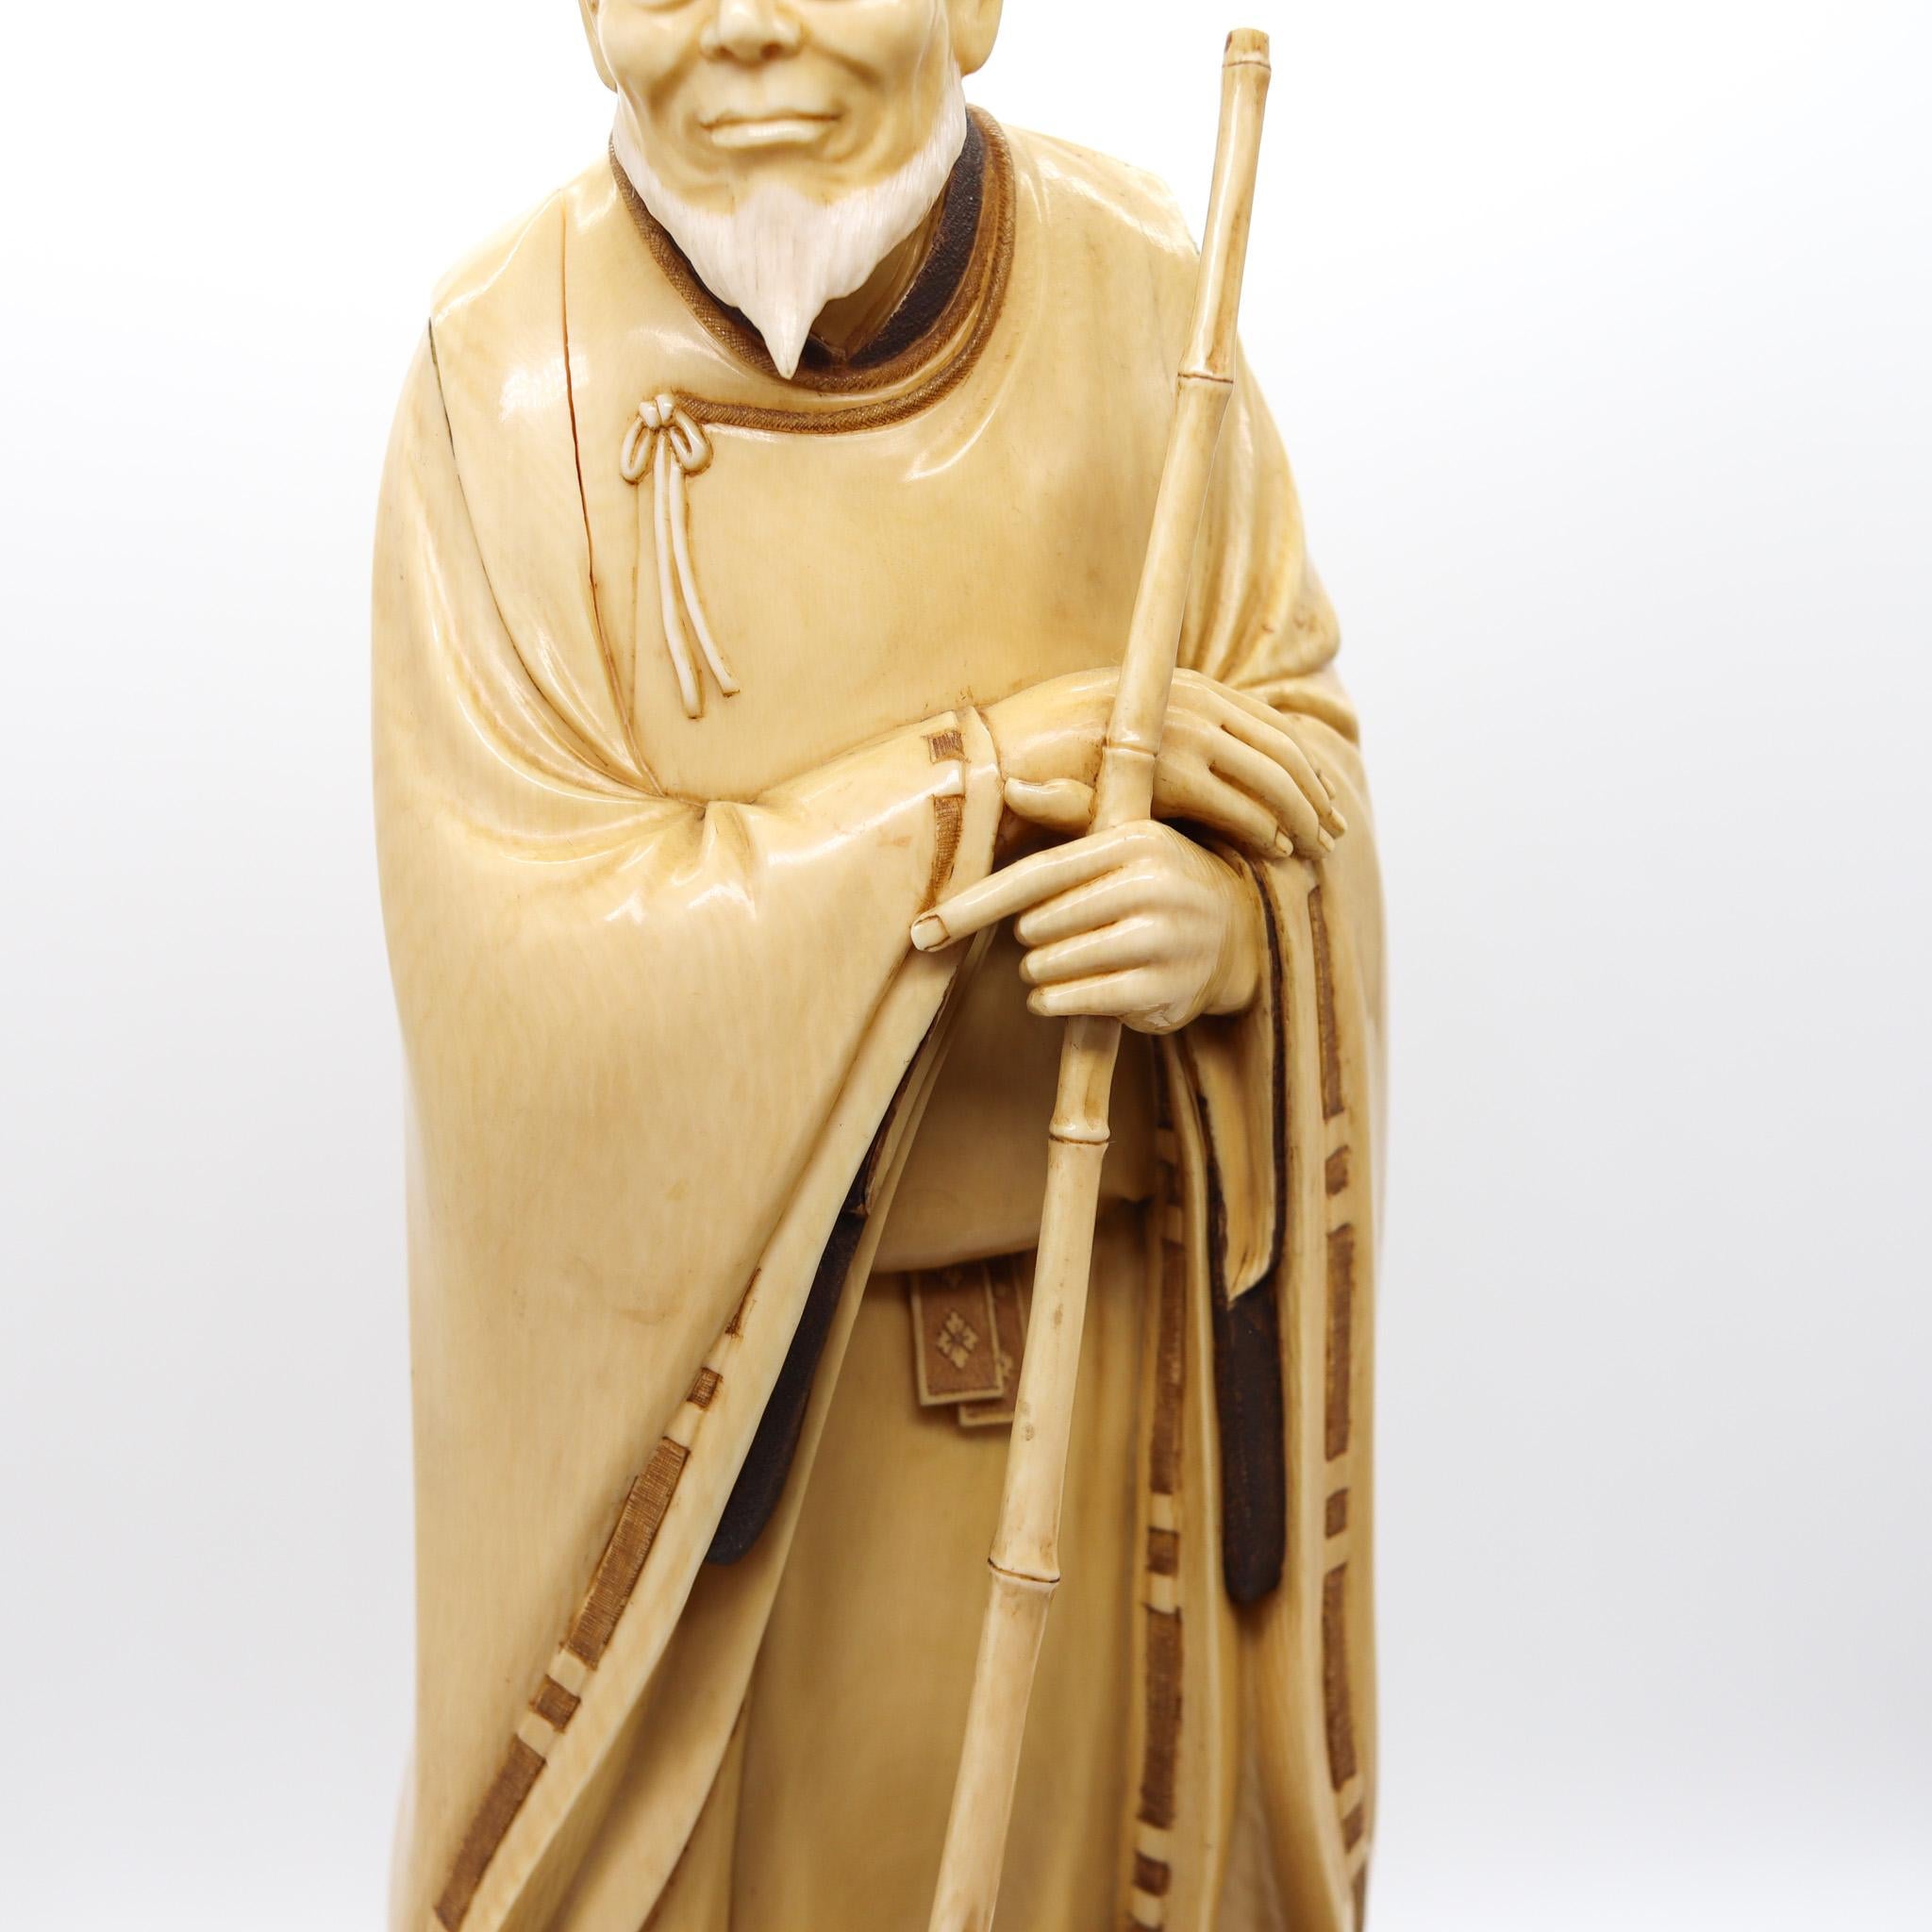 Japanese Japan 1890 Meiji Carved Sculpture of a Dressed Monk With a Rake For Sale